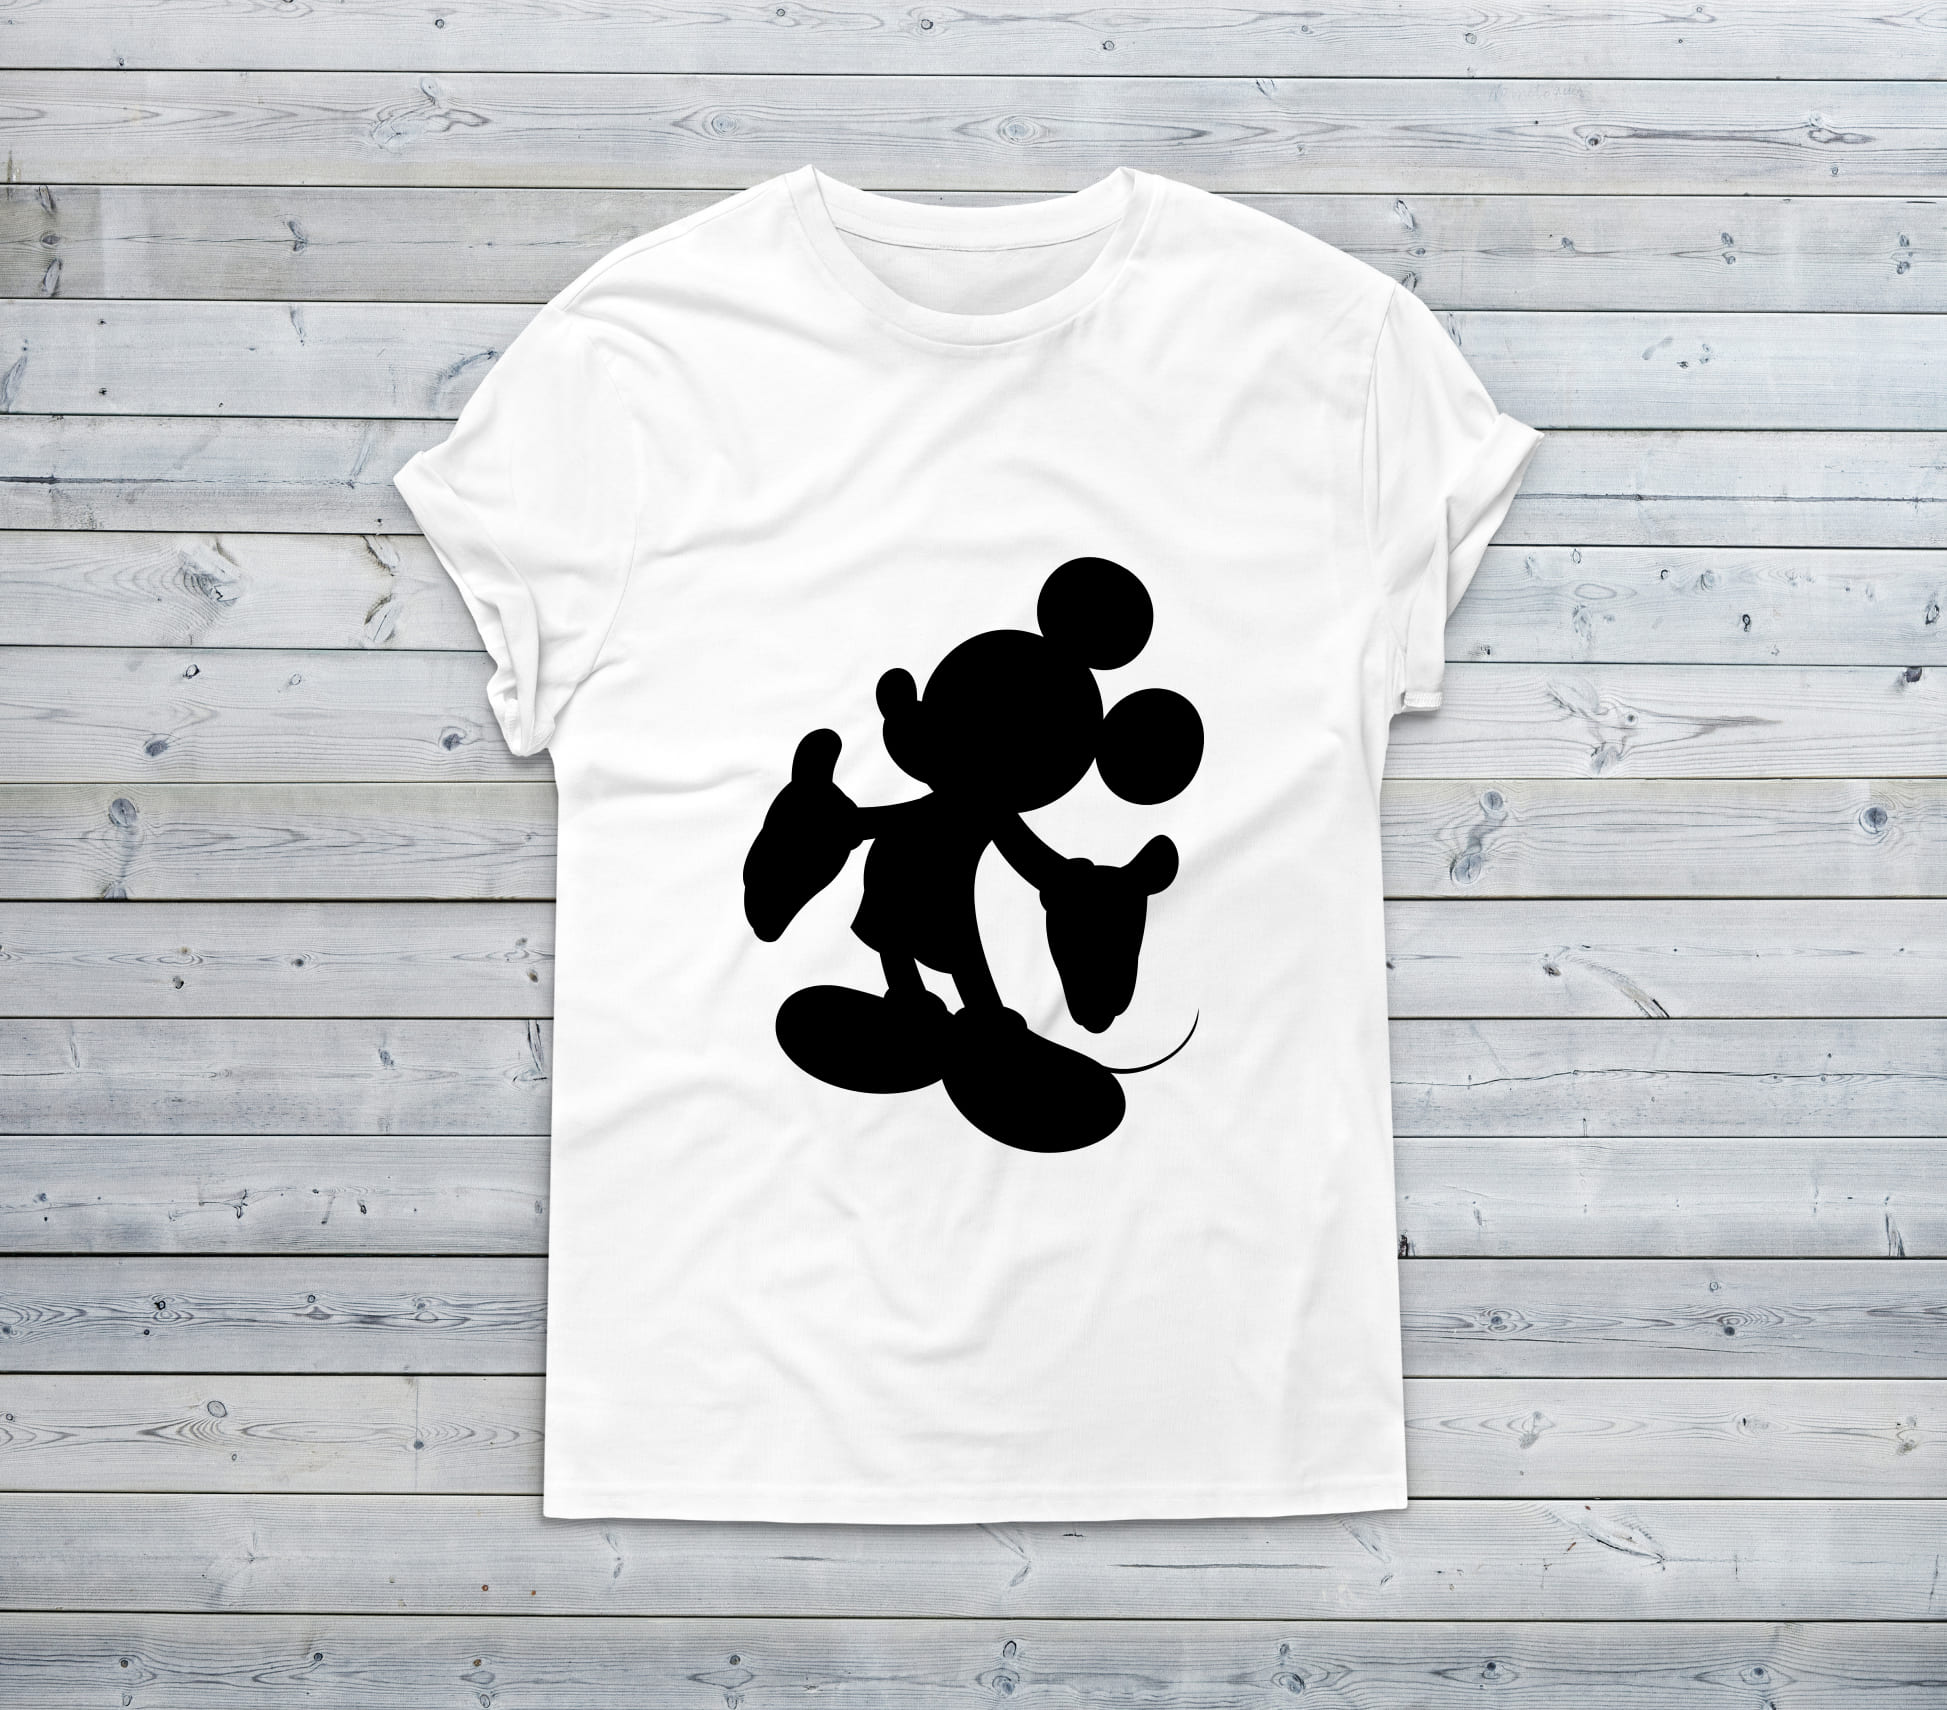 Funny mickey mouse shadow on the white.